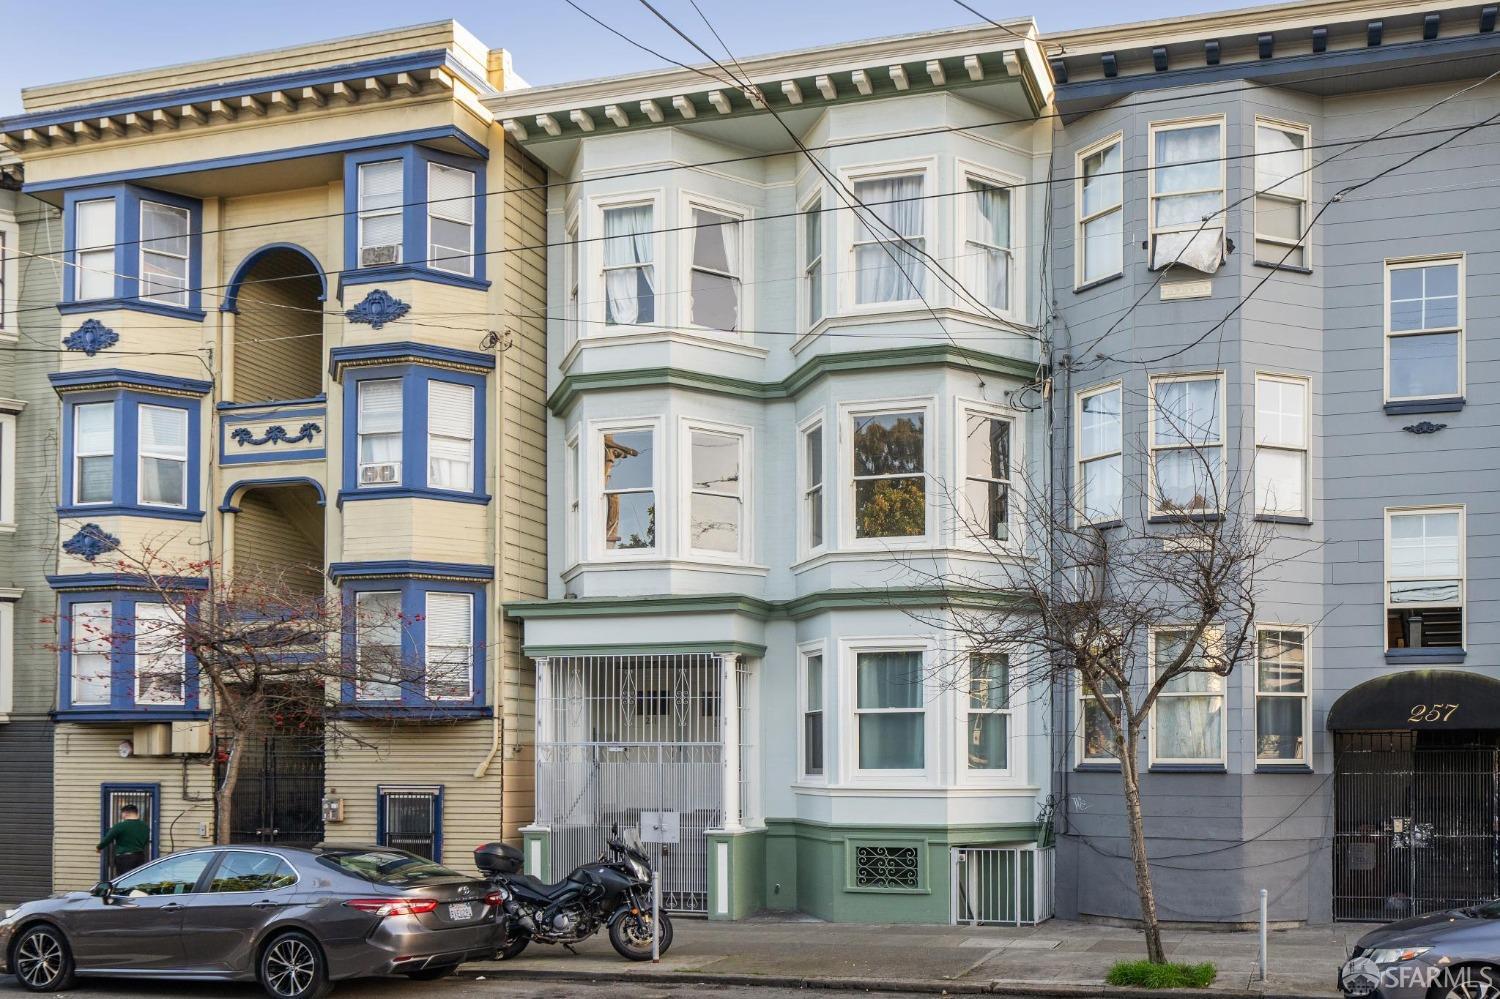 Photo of 253 14th St in San Francisco, CA